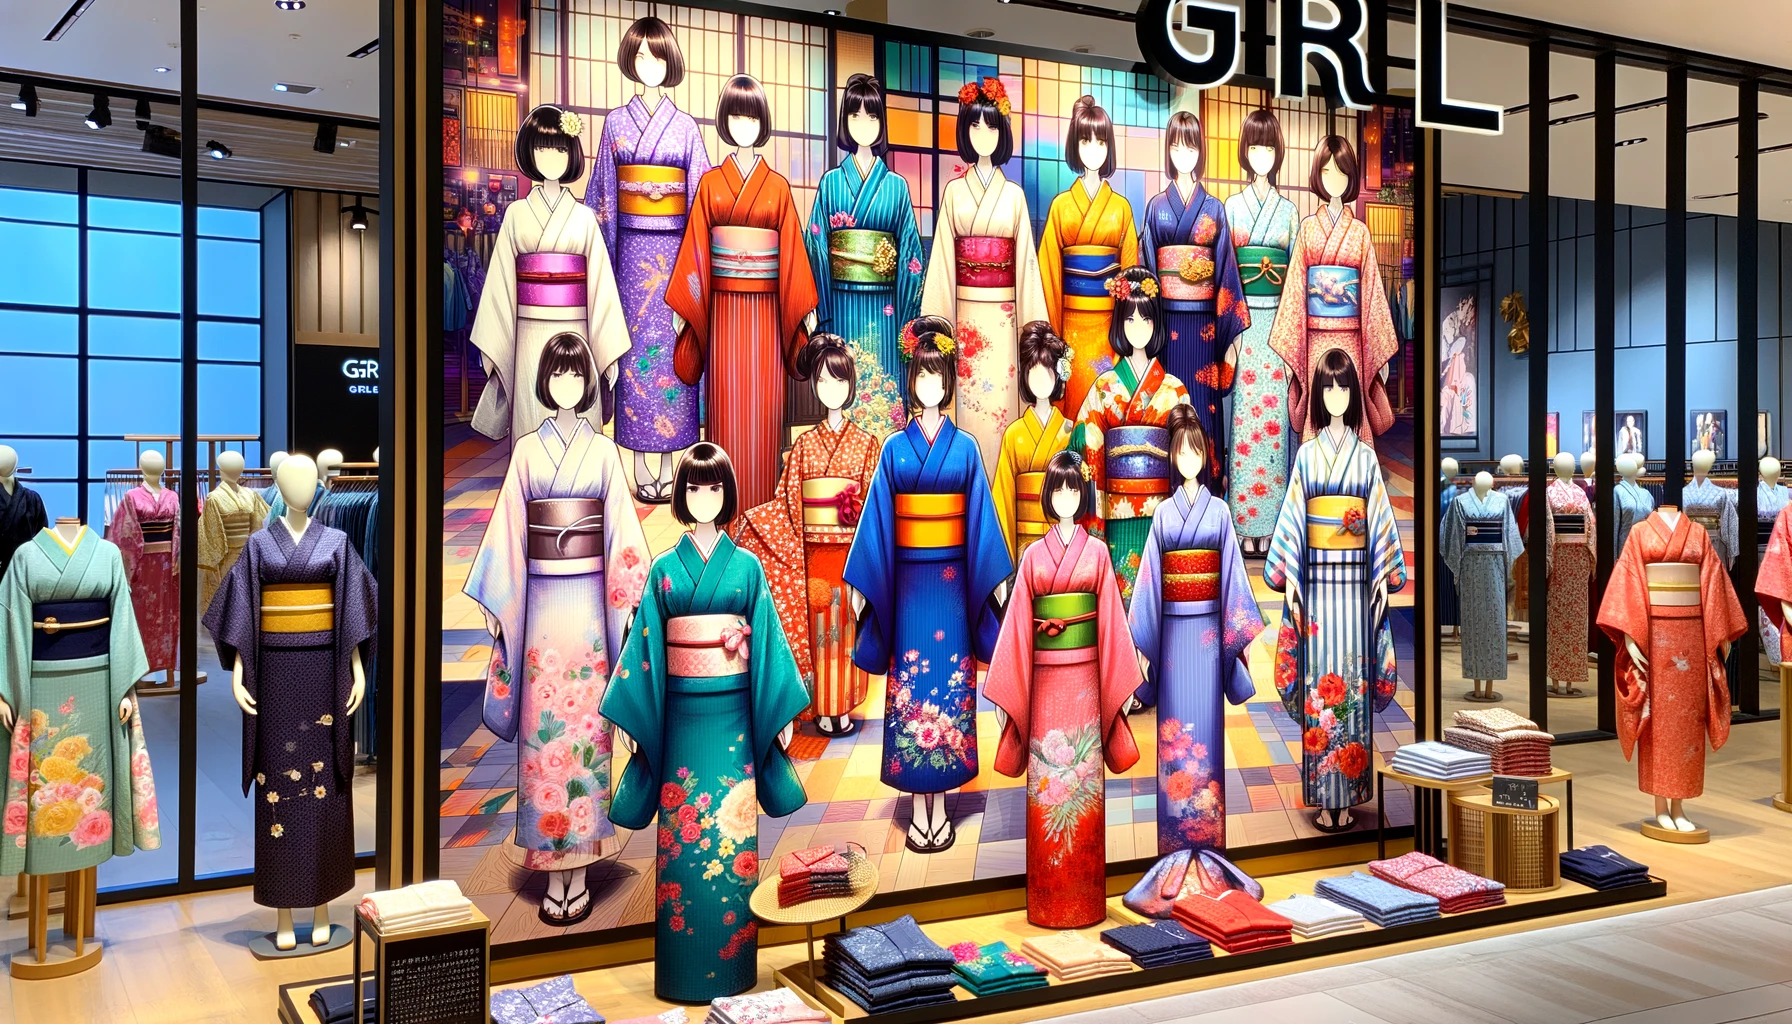 A vibrant display showcasing the variety of yukatas offered by GRL. The image includes an array of different styles, colors, and patterns of yukatas, all beautifully arranged. The background features a stylish shop setting with mannequins and models, and the text 'GRL' is prominently displayed.